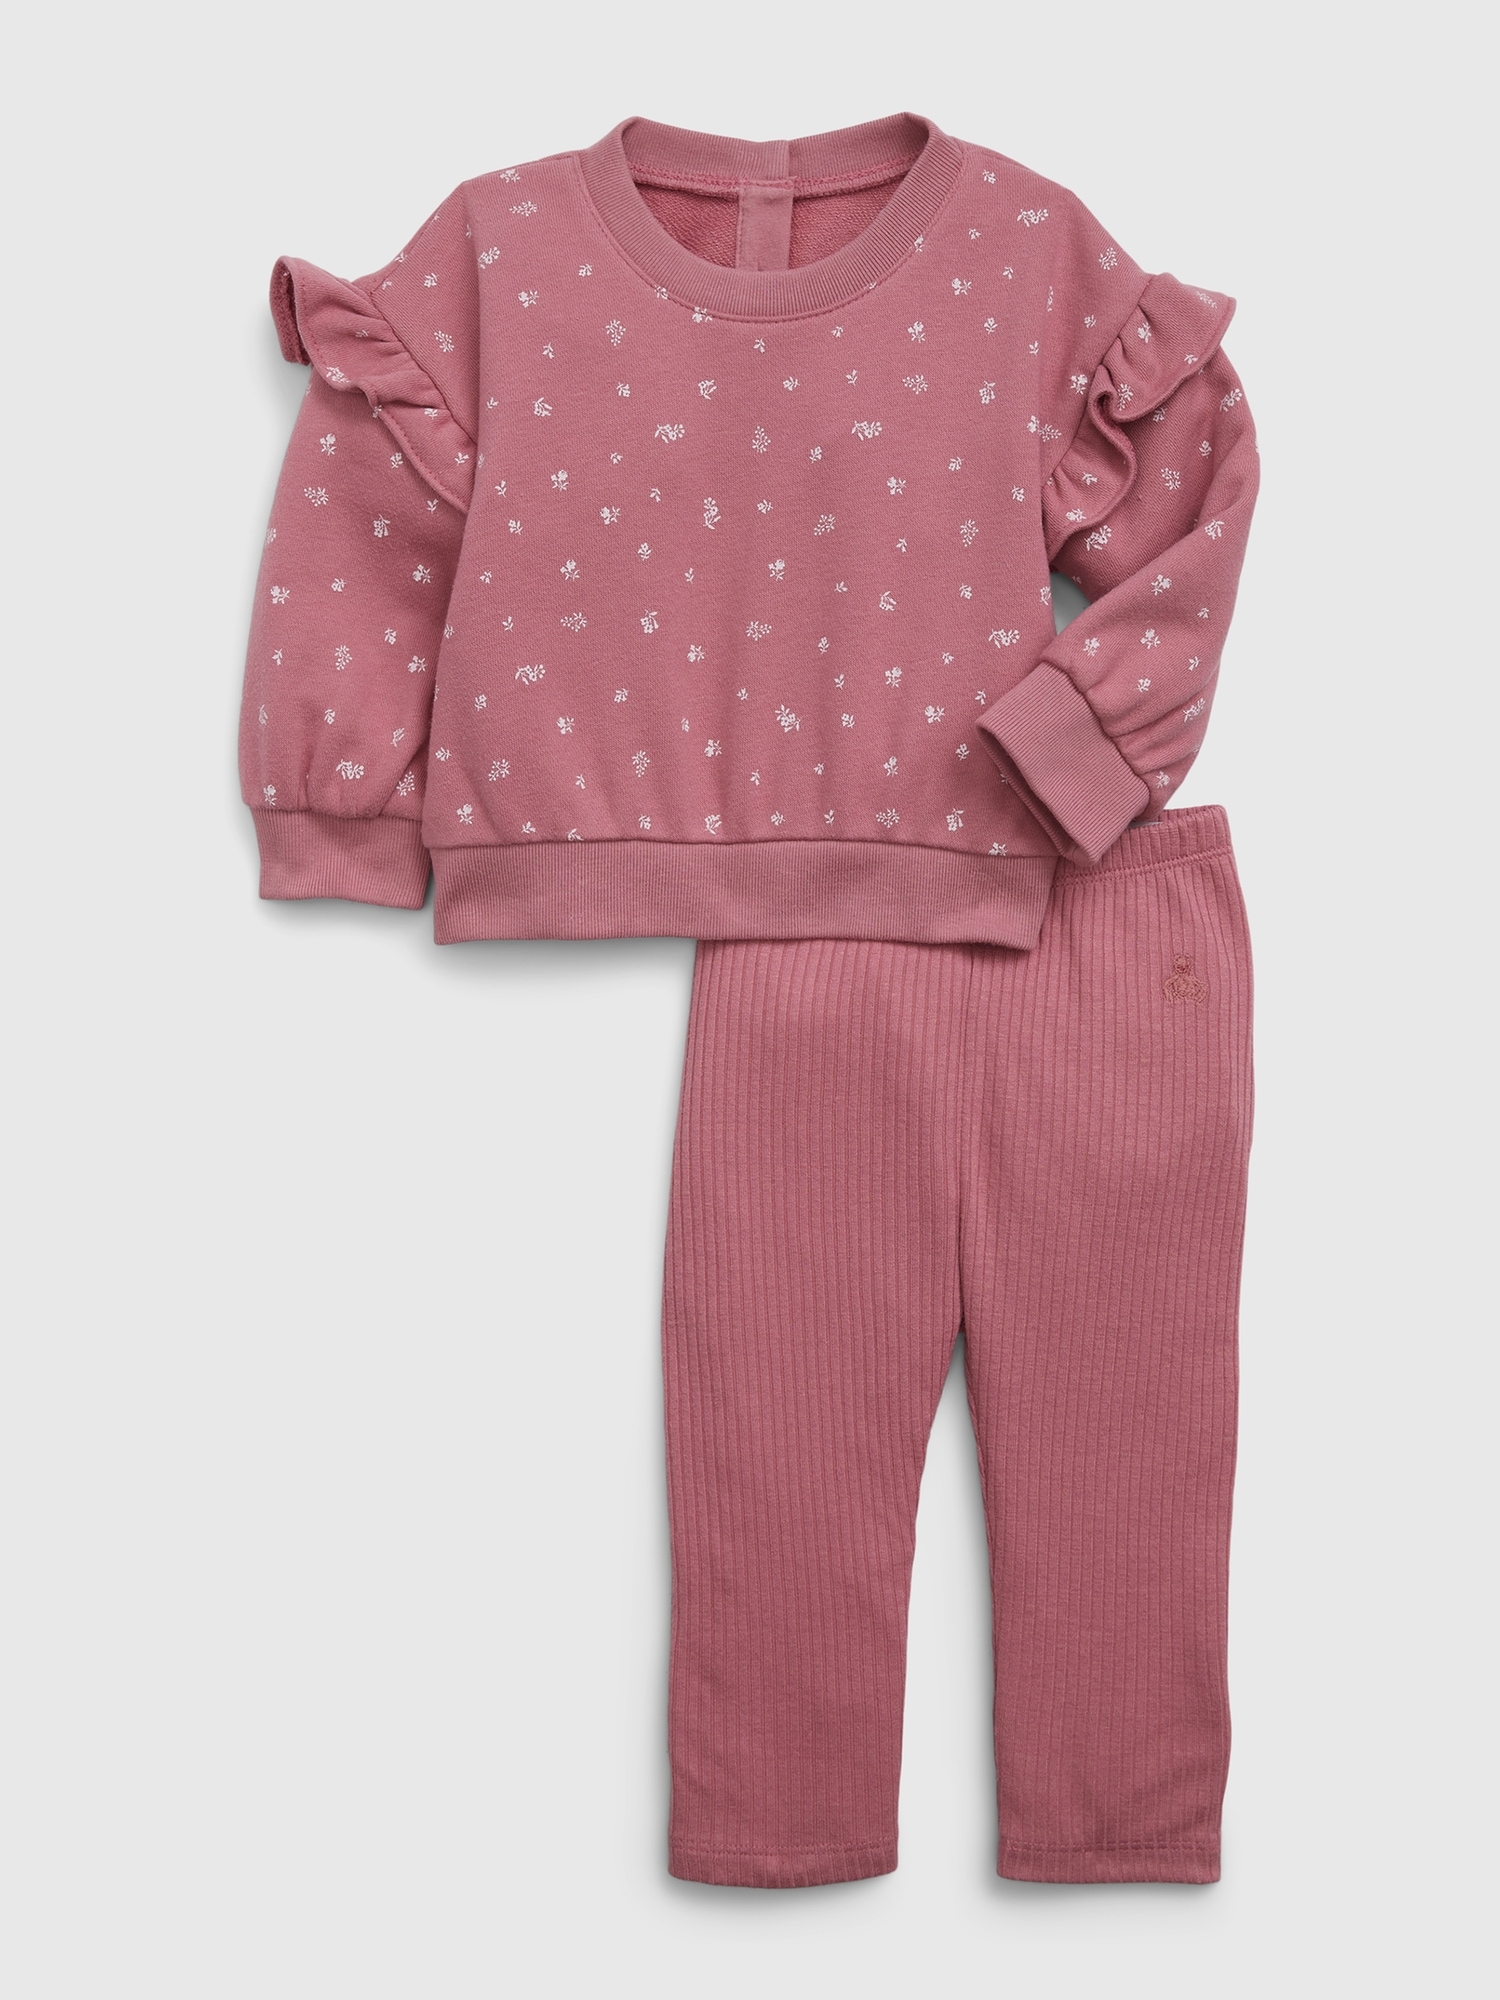 Baby Ruffle Two-Piece Outfit Set | Gap